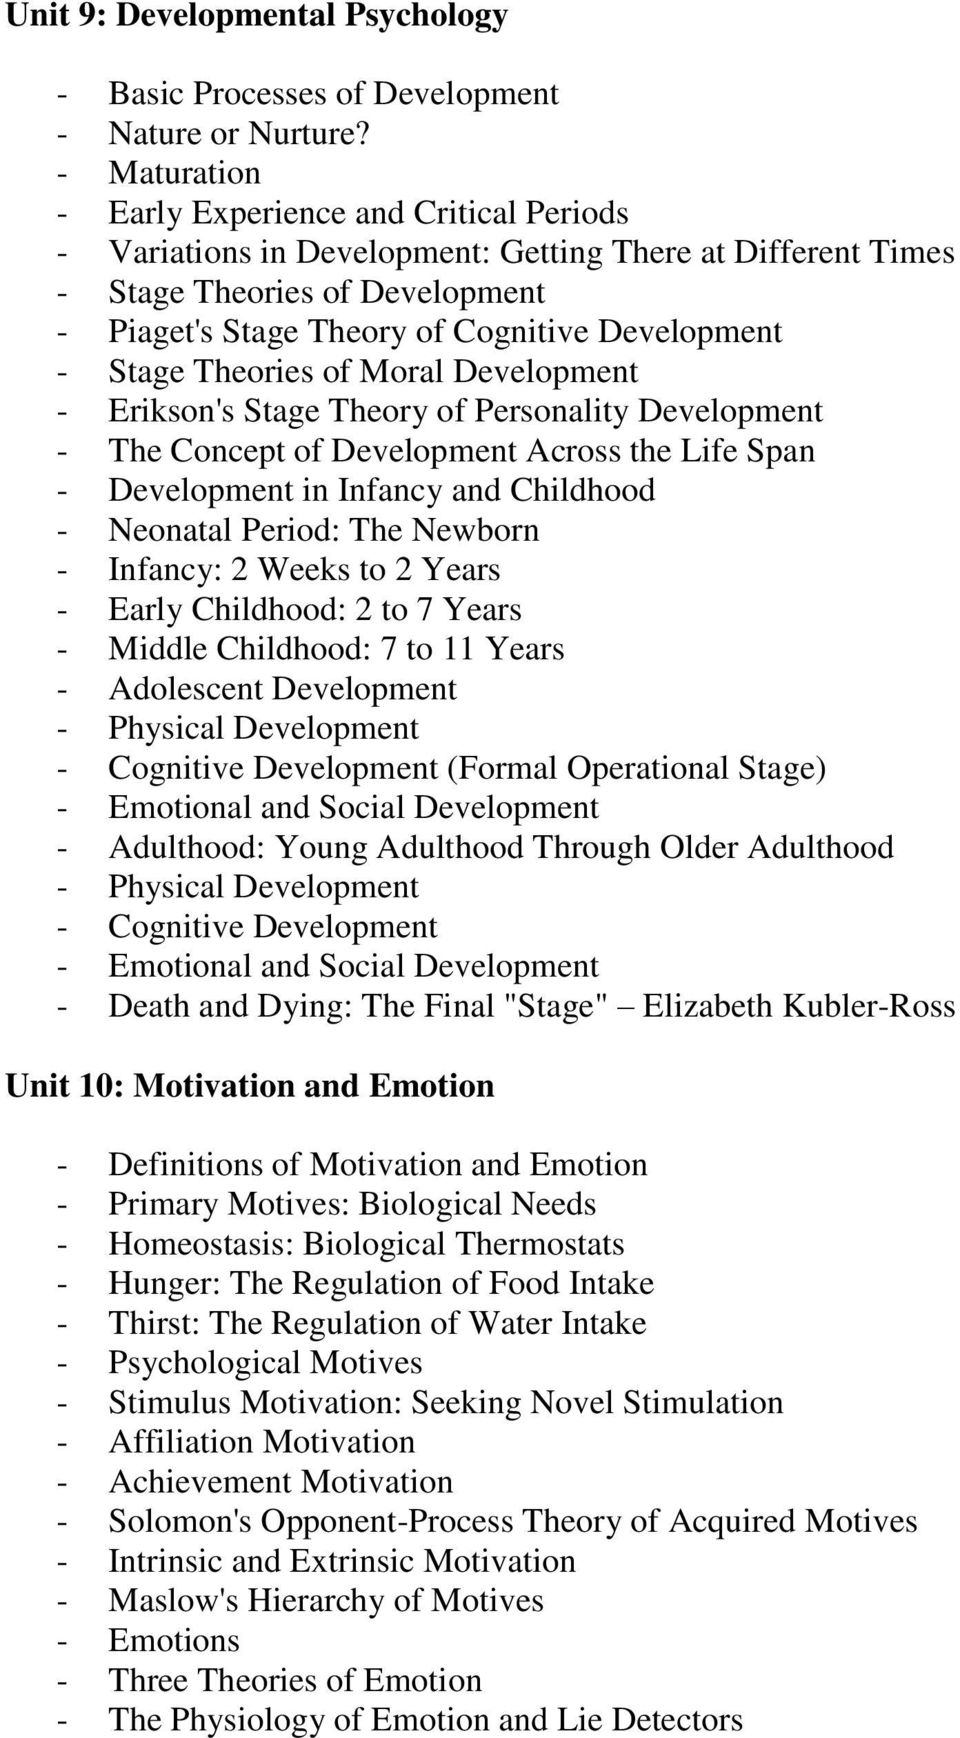 Stage Theories of Moral Development - Erikson's Stage Theory of Personality Development - The Concept of Development Across the Life Span - Development in Infancy and Childhood - Neonatal Period: The